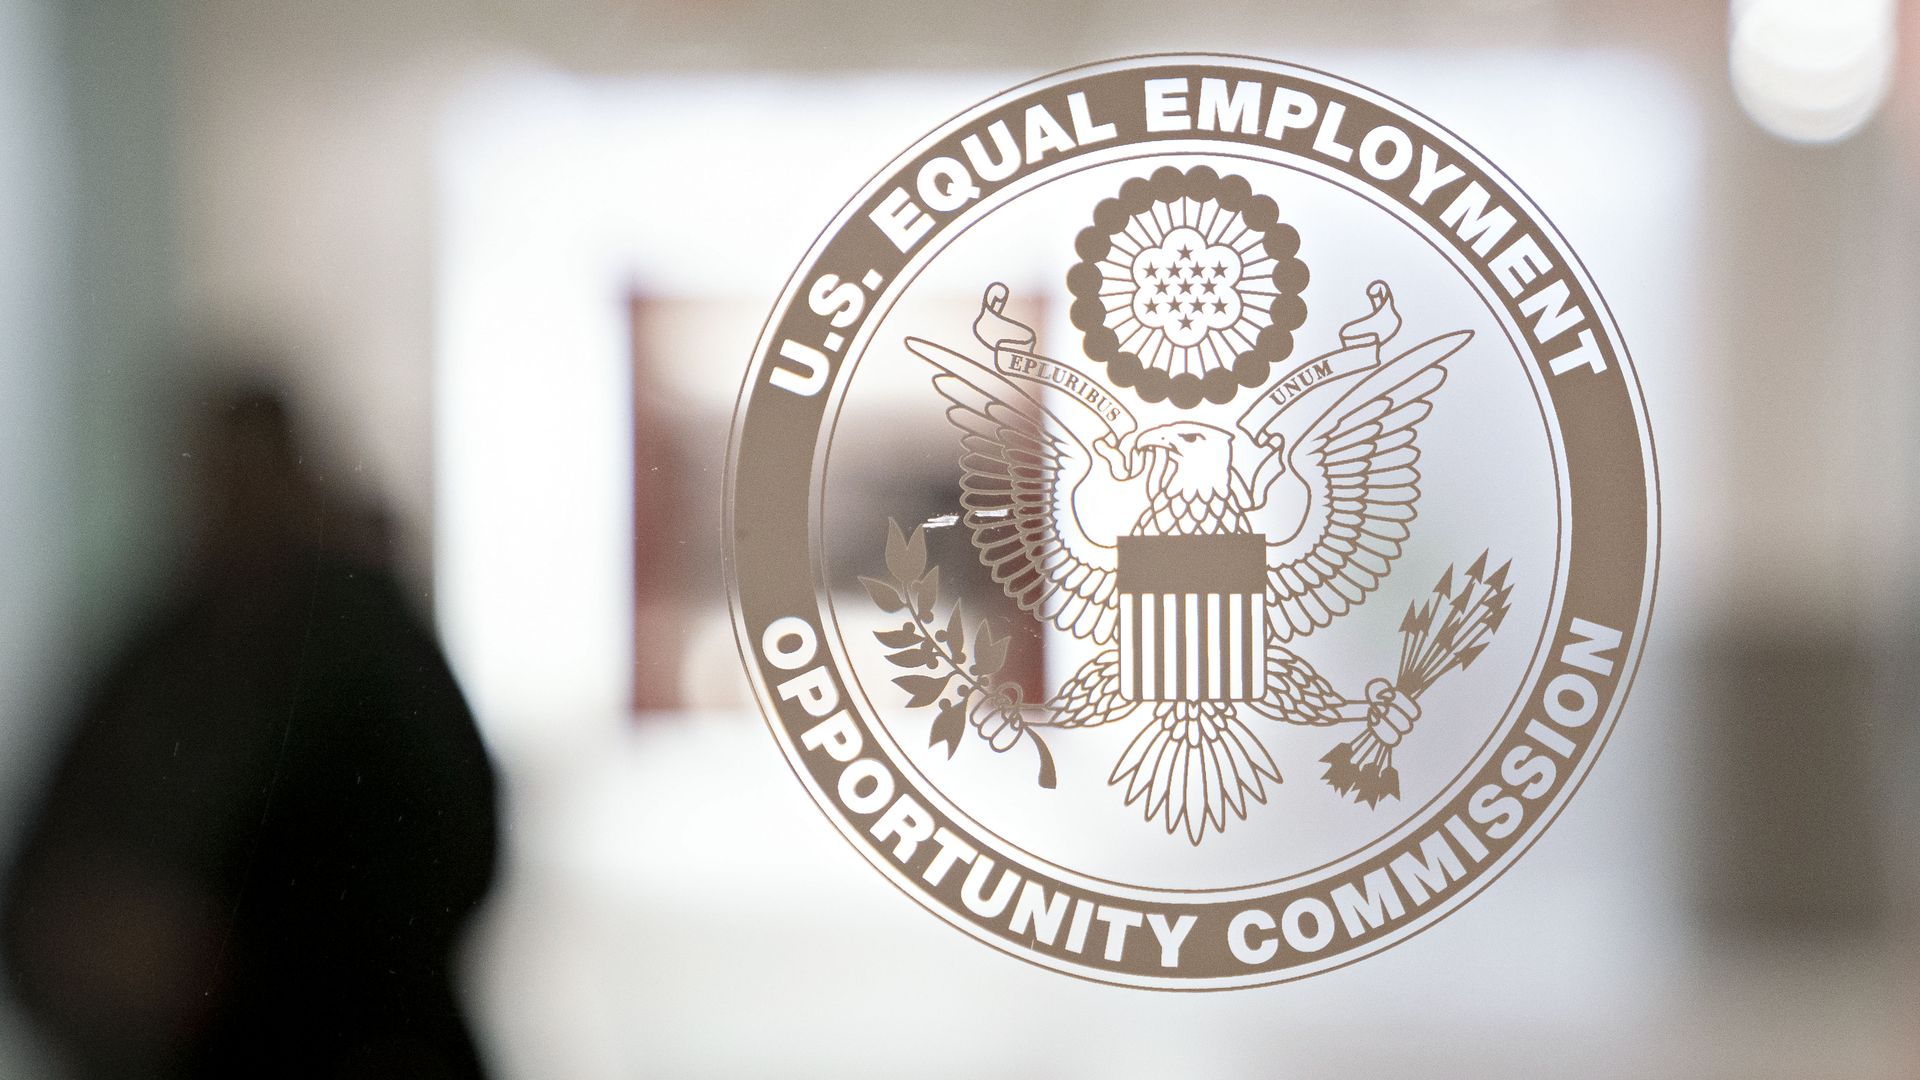 The Equal Employment Opportunity Commission (EEOC) seal is displayed on a window at the headquarters in Washington, D.C